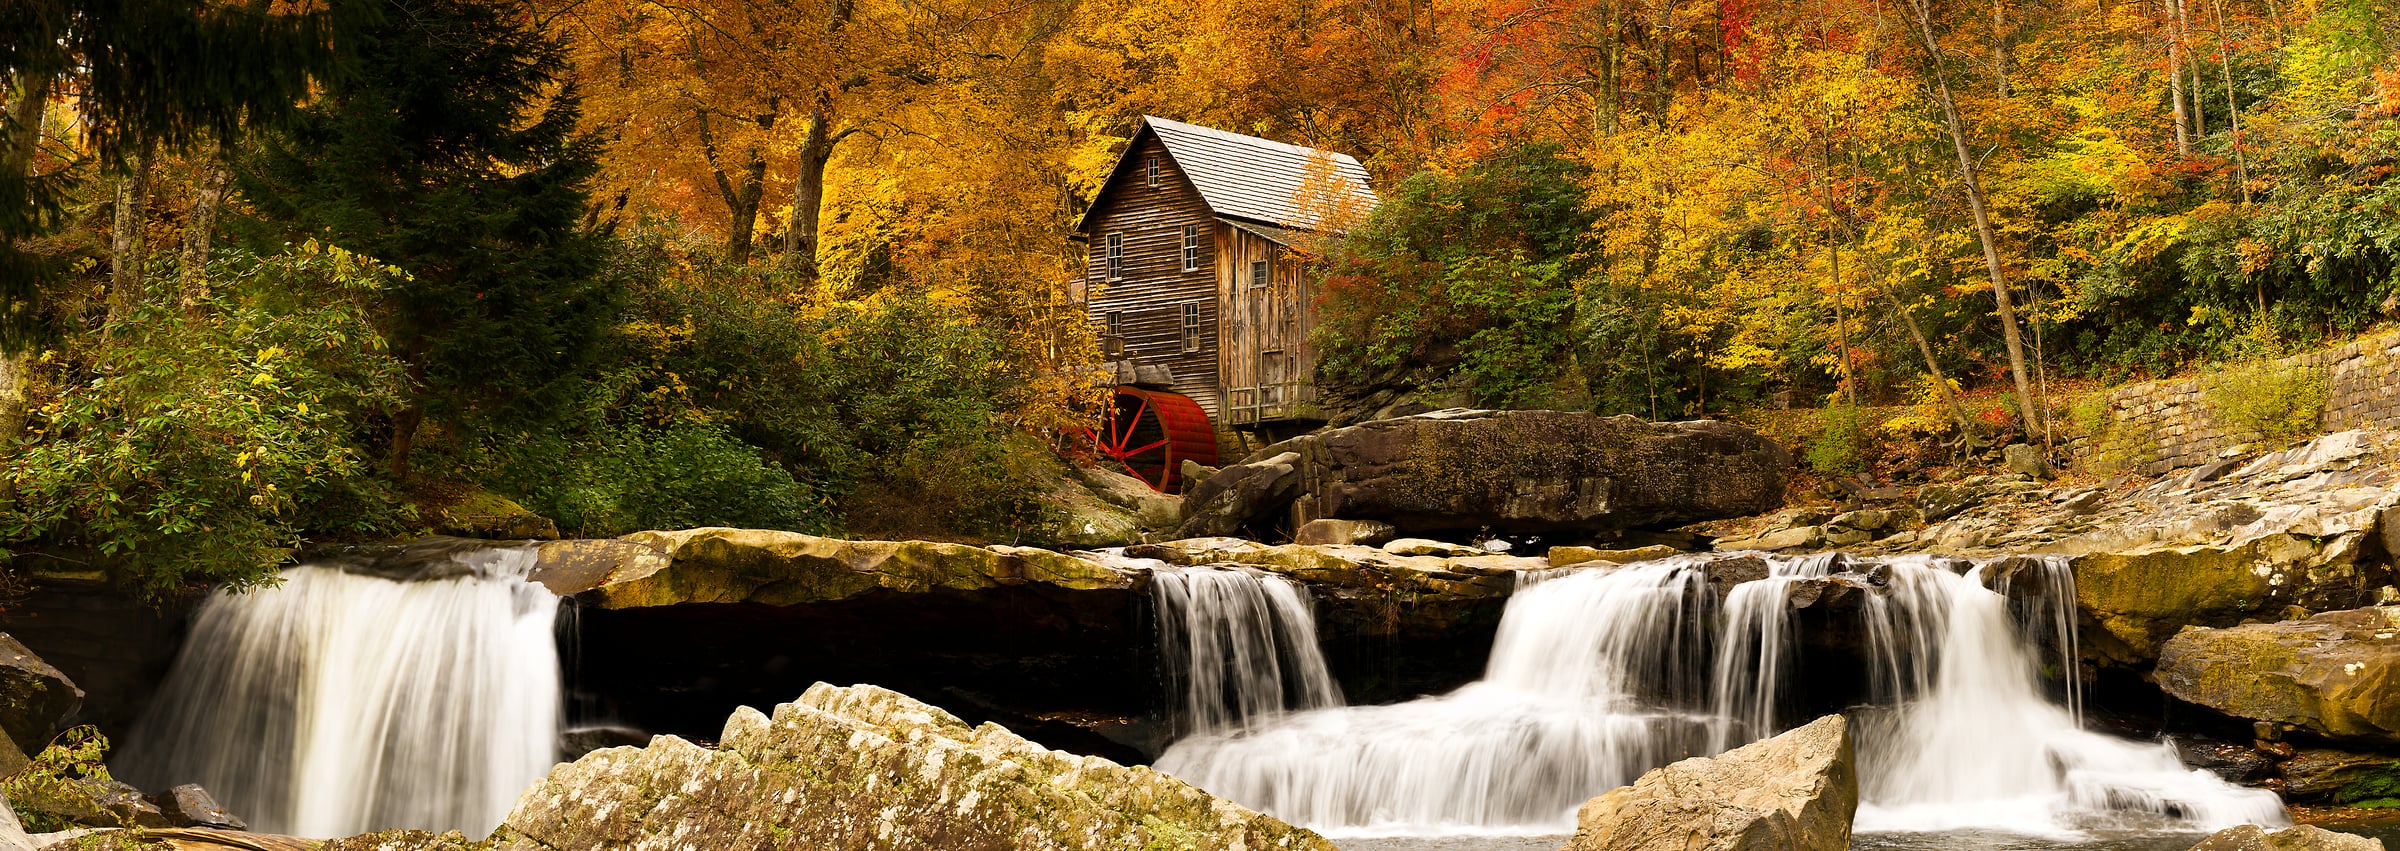 621 megapixels! A very high resolution, large-format VAST photo print of an autumn scene with fall foliage, a watermill, a forest, and waterfalls; landscape nature photograph created by David David at Glade Creek Grist Mill in Babcock State Park, West Virginia